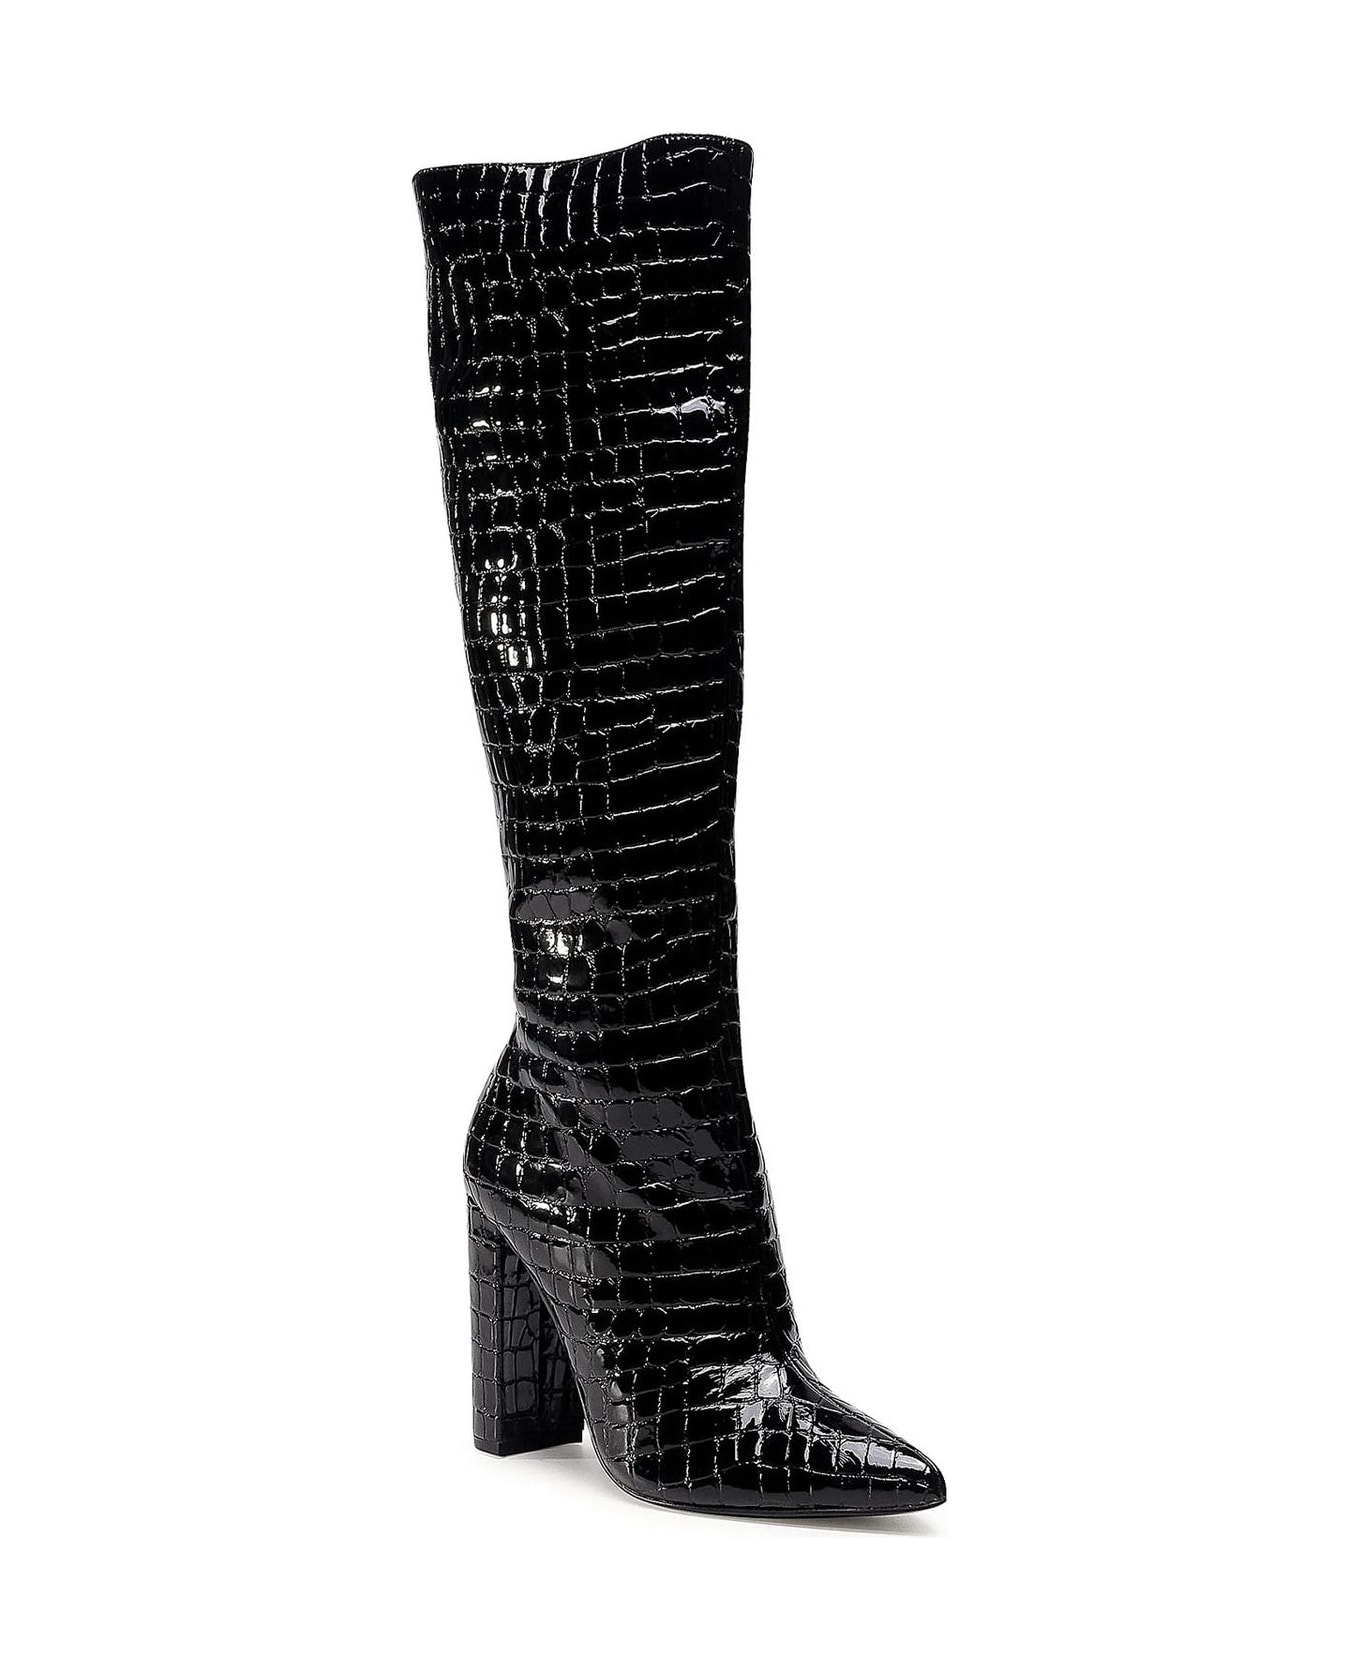 Steve Madden Leather Boots - Black ブーツ